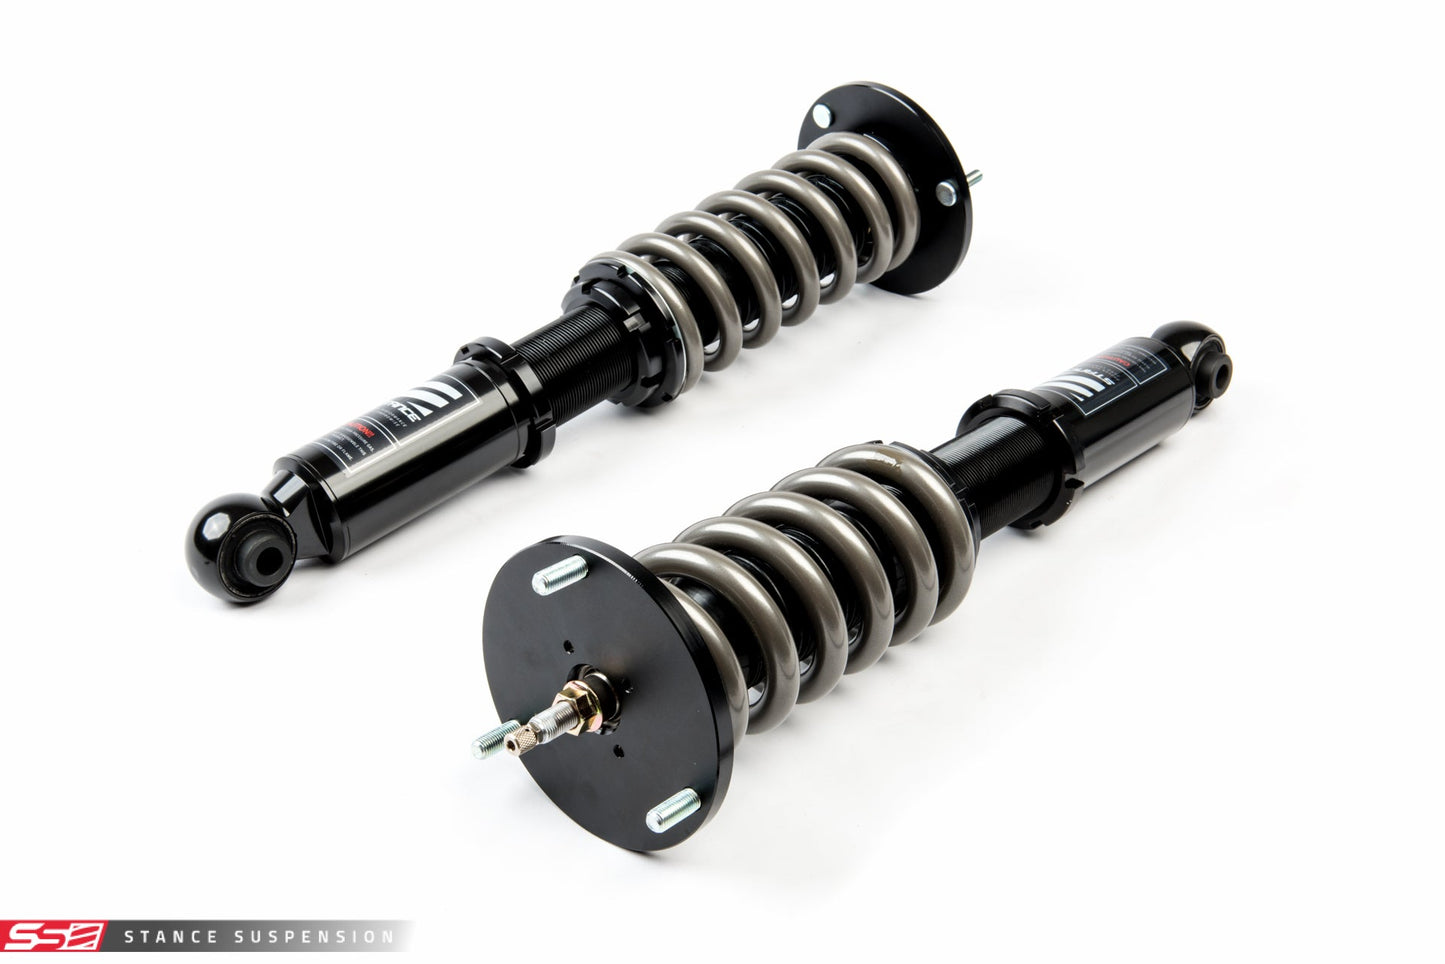 Stance Suspension - XR1 Coilovers for 87-92 Toyota Supra JZA70 (ST-JZA70-XR1)